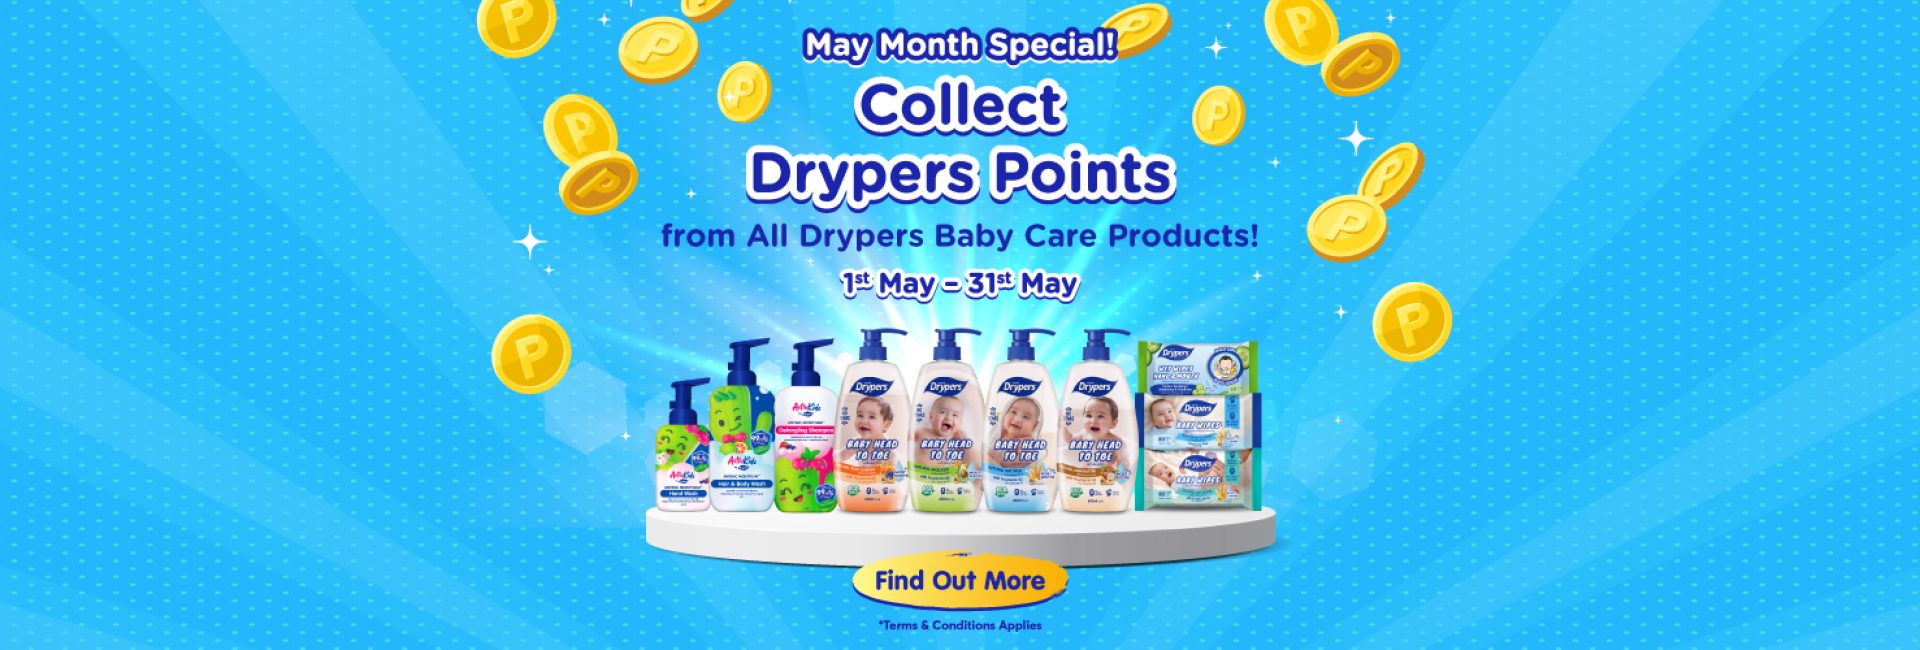 Drypers-Baby-Club-Earn-Points_1920x500_ENG